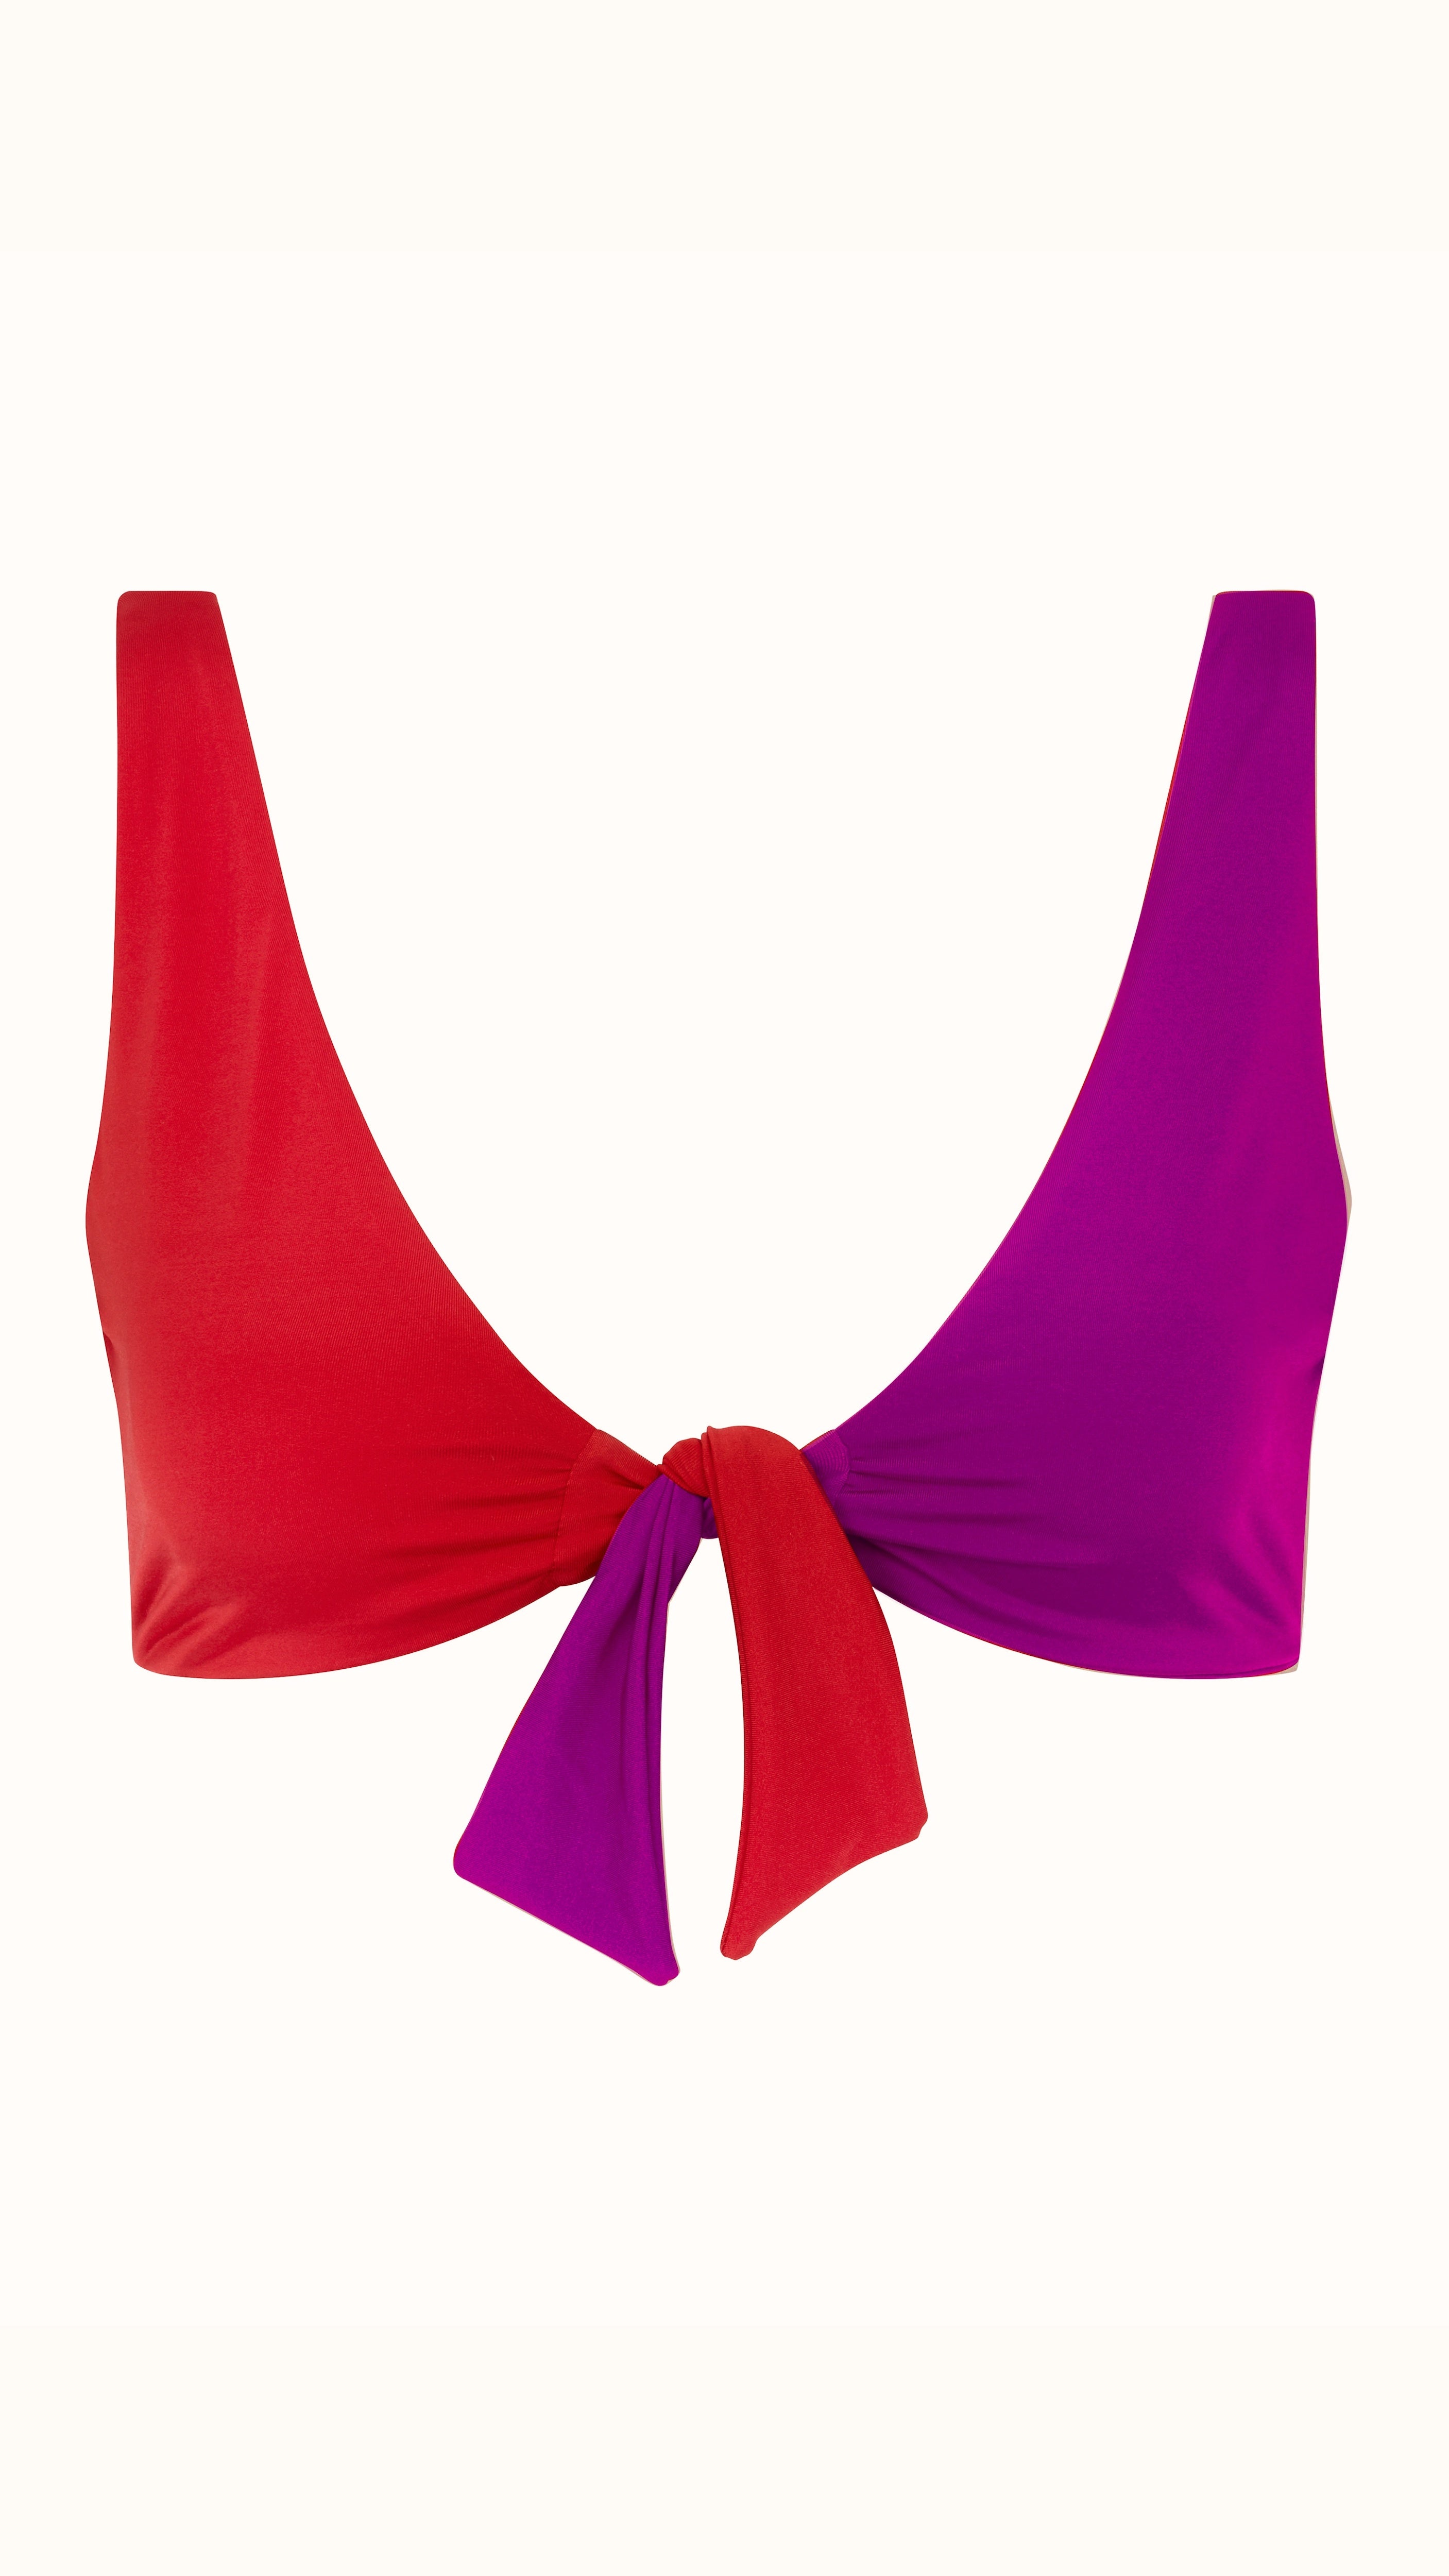 Talia Collins The Bow Tie Top in Red and Plum. Sustainable swimwear made from recycled materials. Classic front tying bikini top in color block red and purple. V neck coverage bikini bathing suit top. Experience 27 Madrid. Product photo front view.